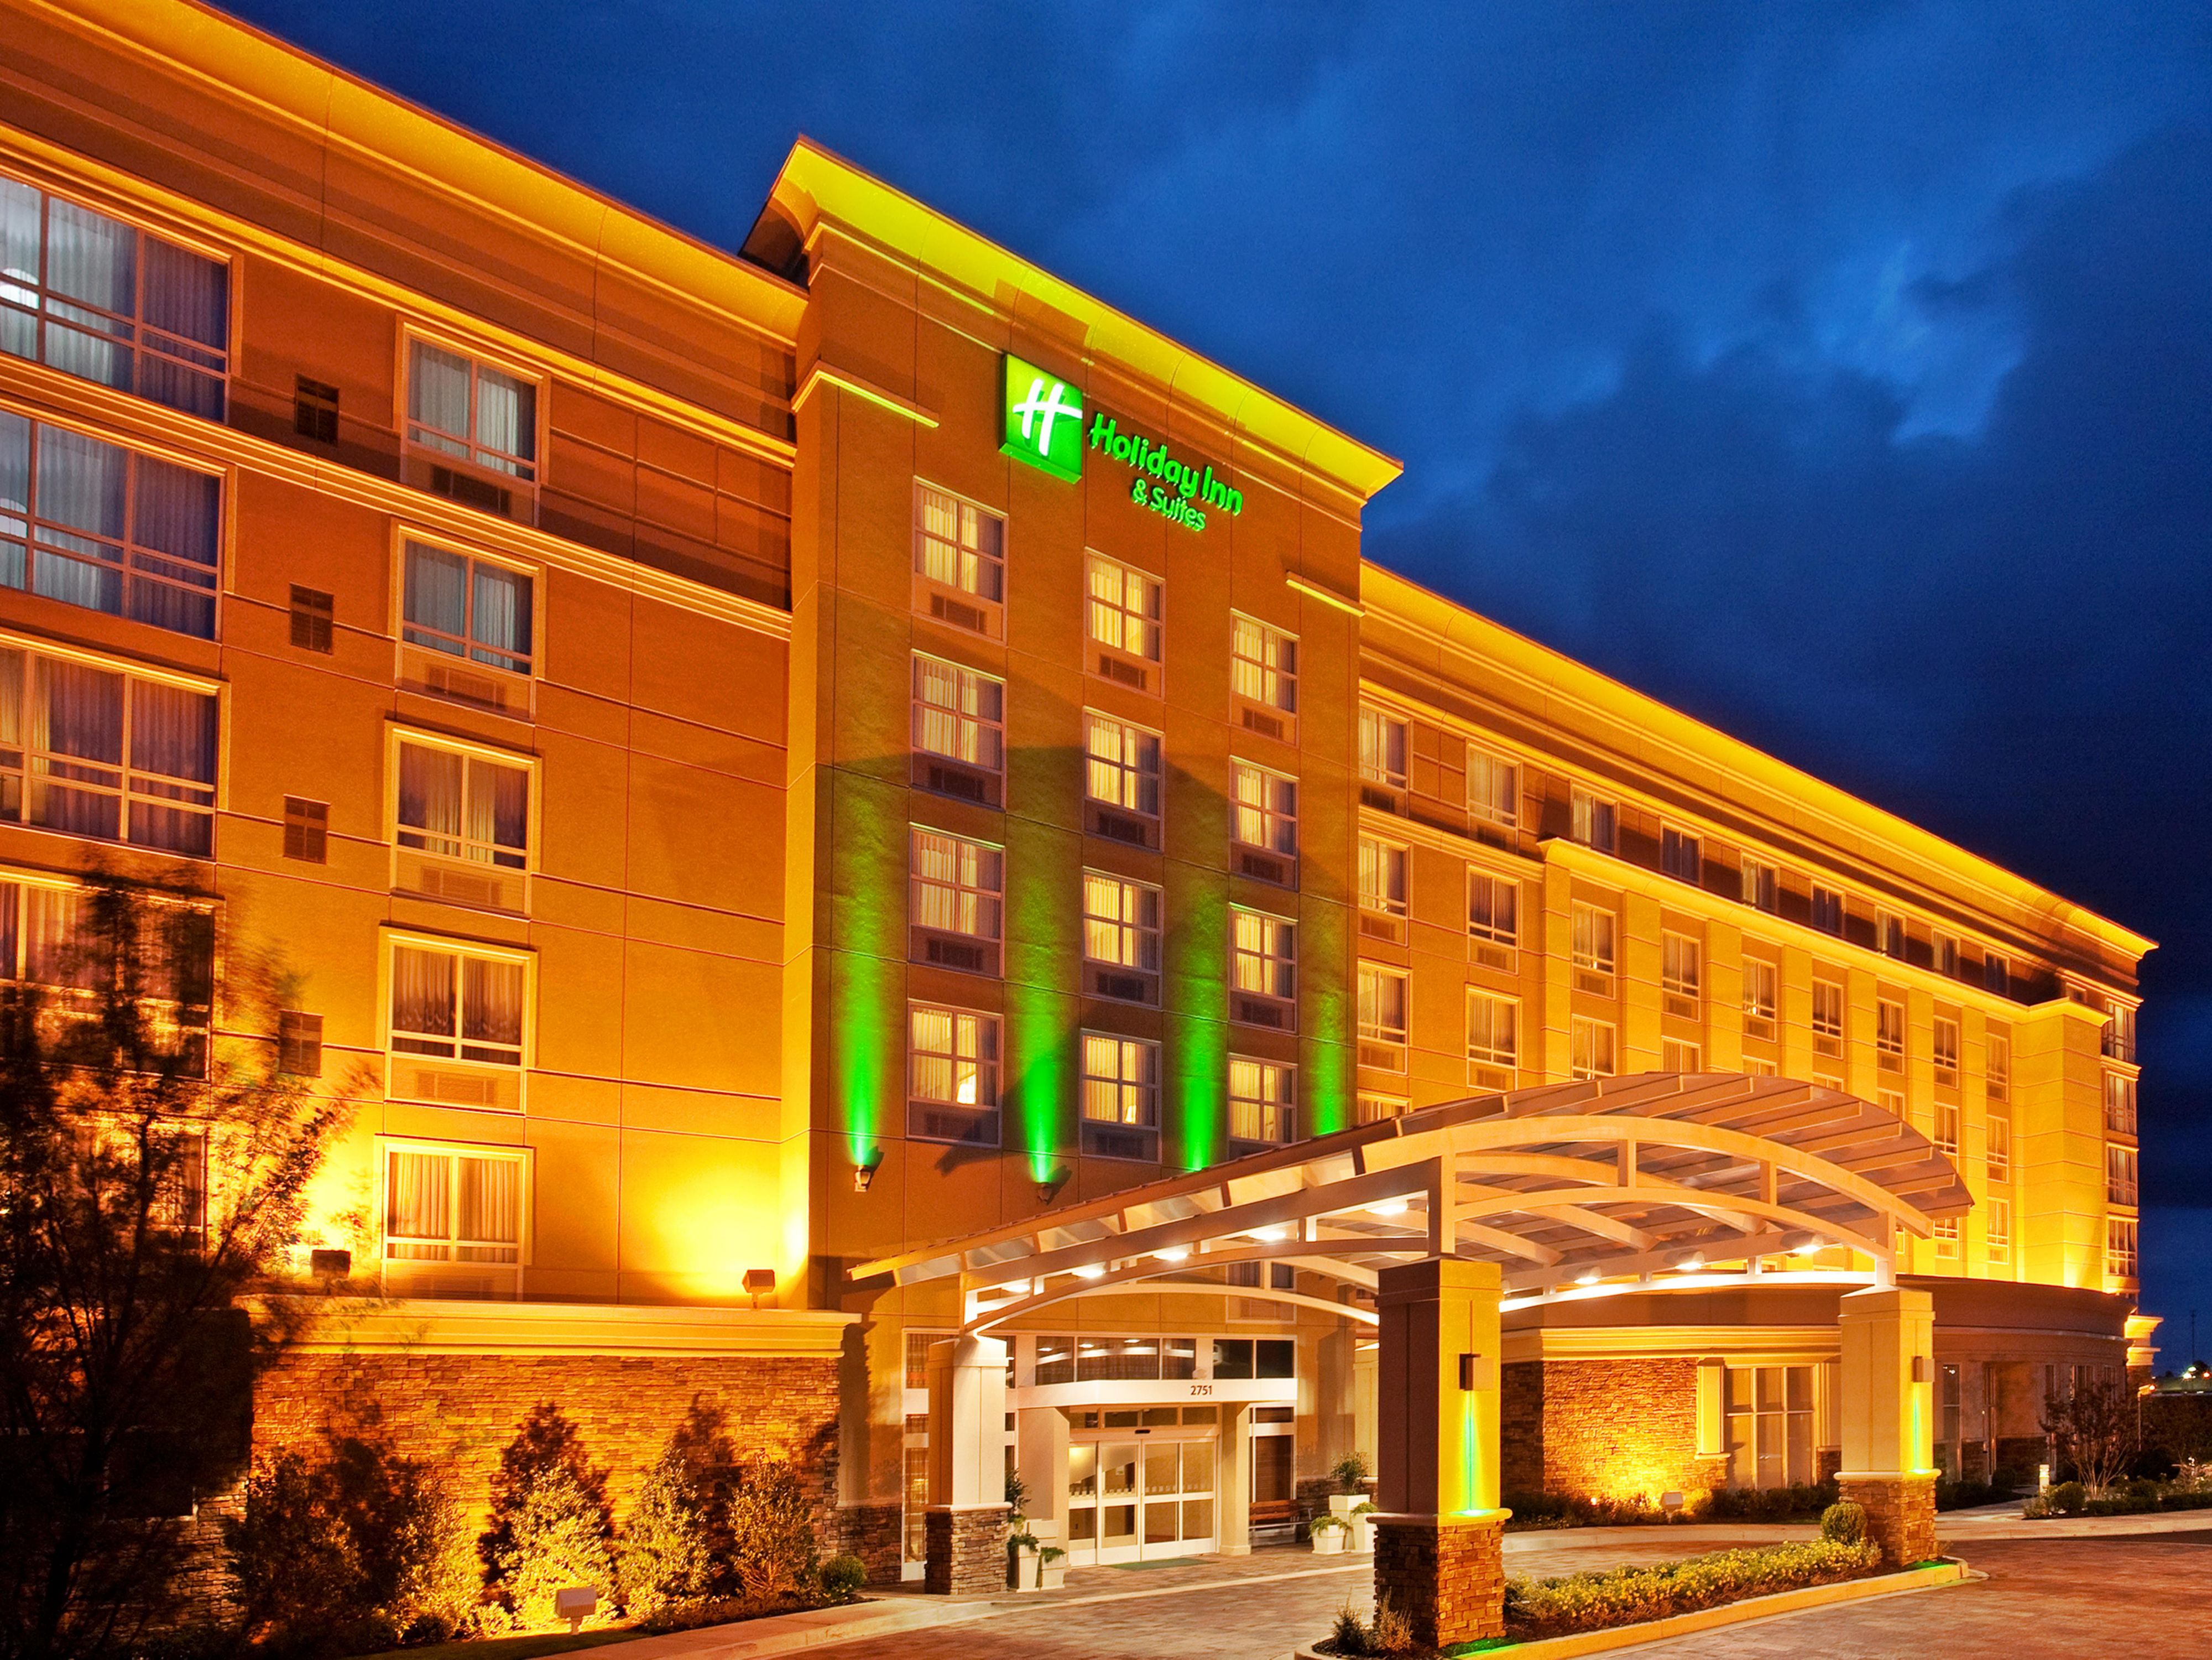 Holiday Inn Hotel And Suites Memphis 4047009002 4x3